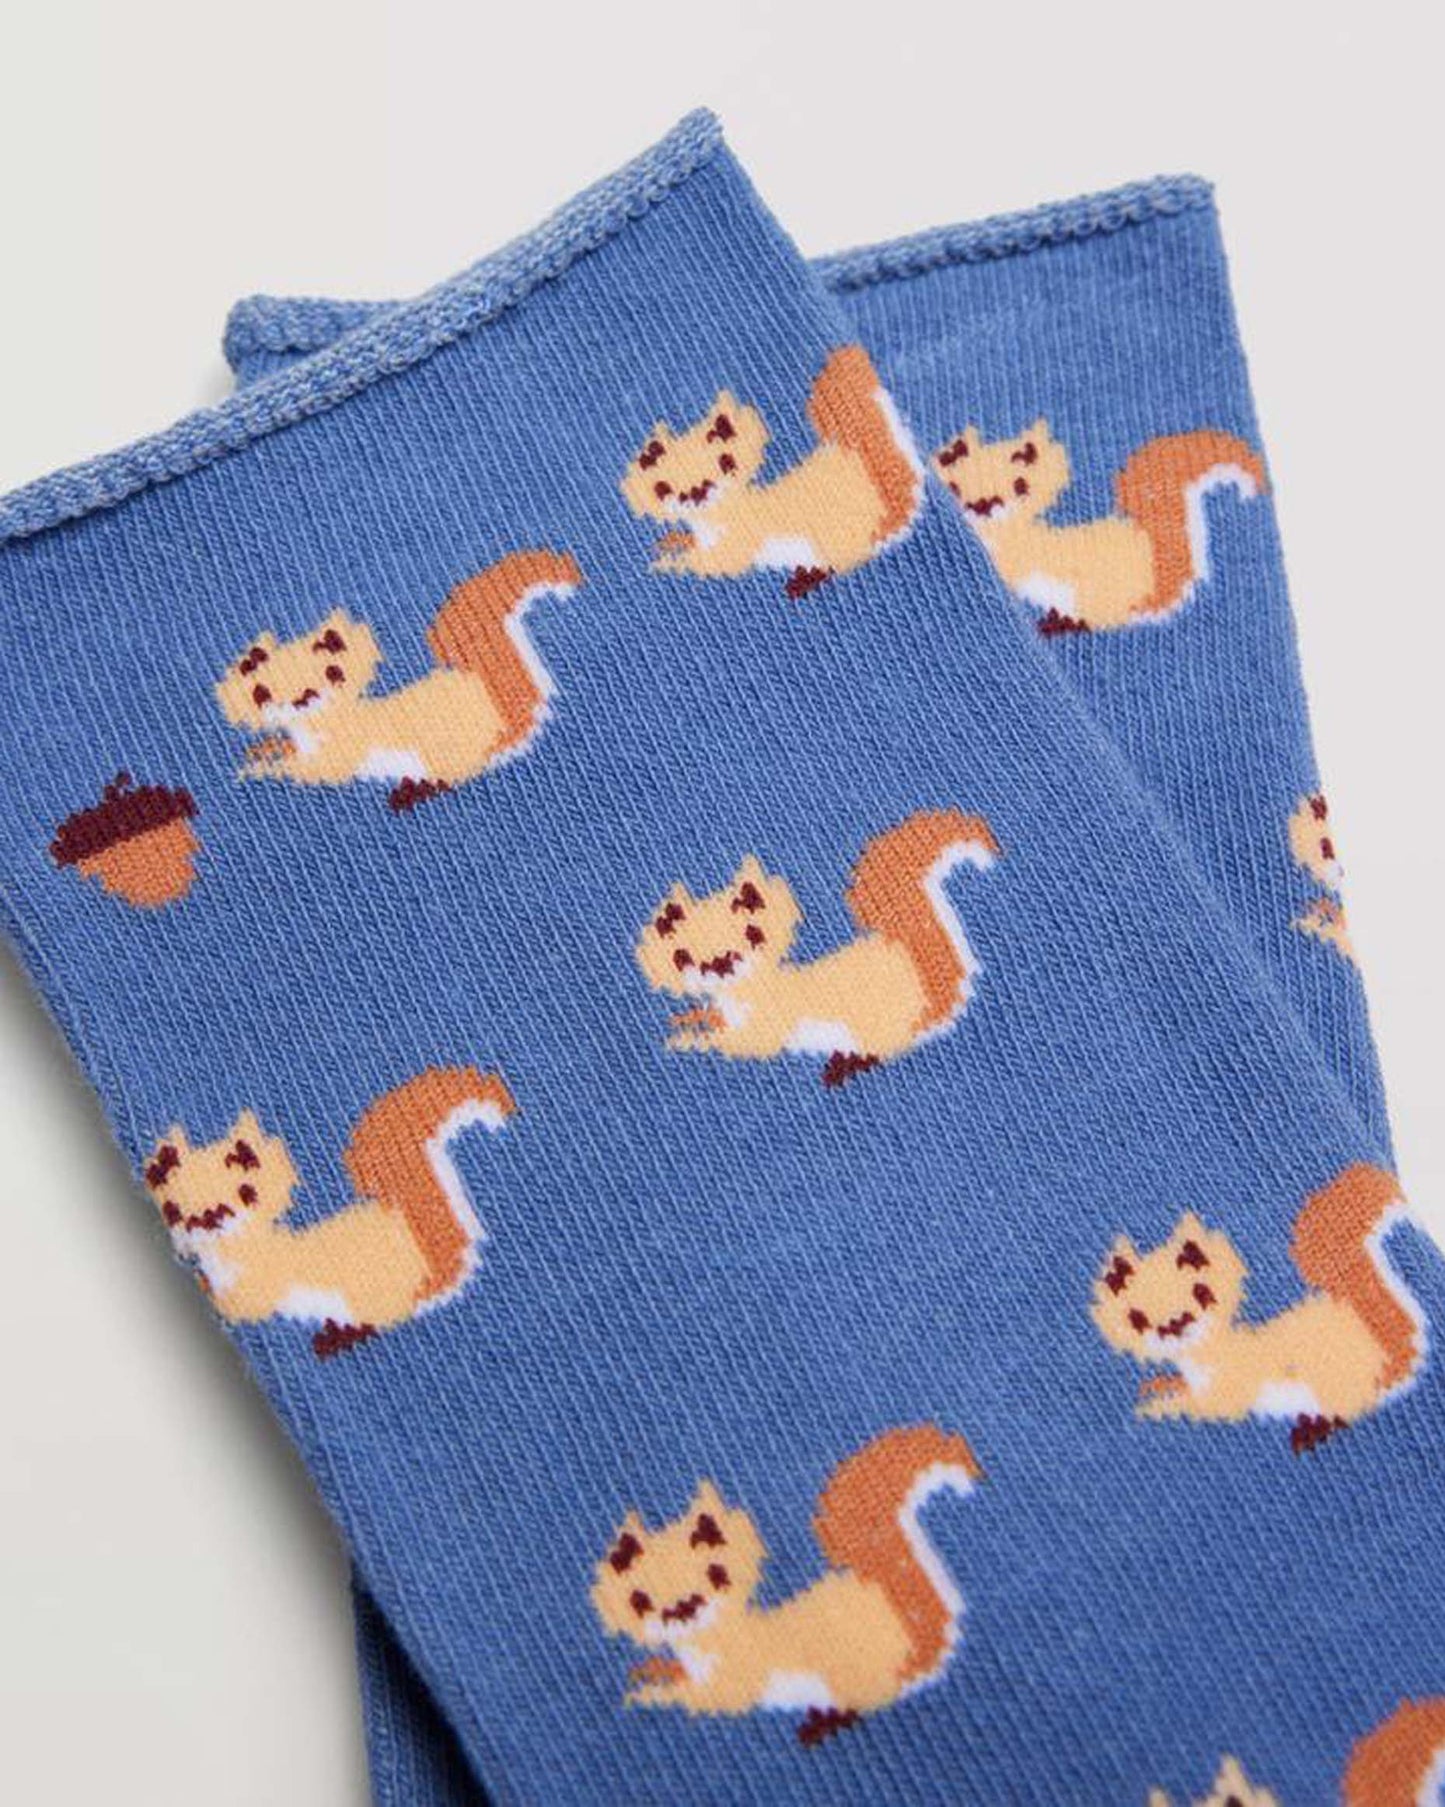 Ysabel Mora 12880 Squirrel Socks - Blue cotton socks with an all over squirrel and acorn pattern in peach and rust, shaped heel, flat toe seam and no cuff edge roll.